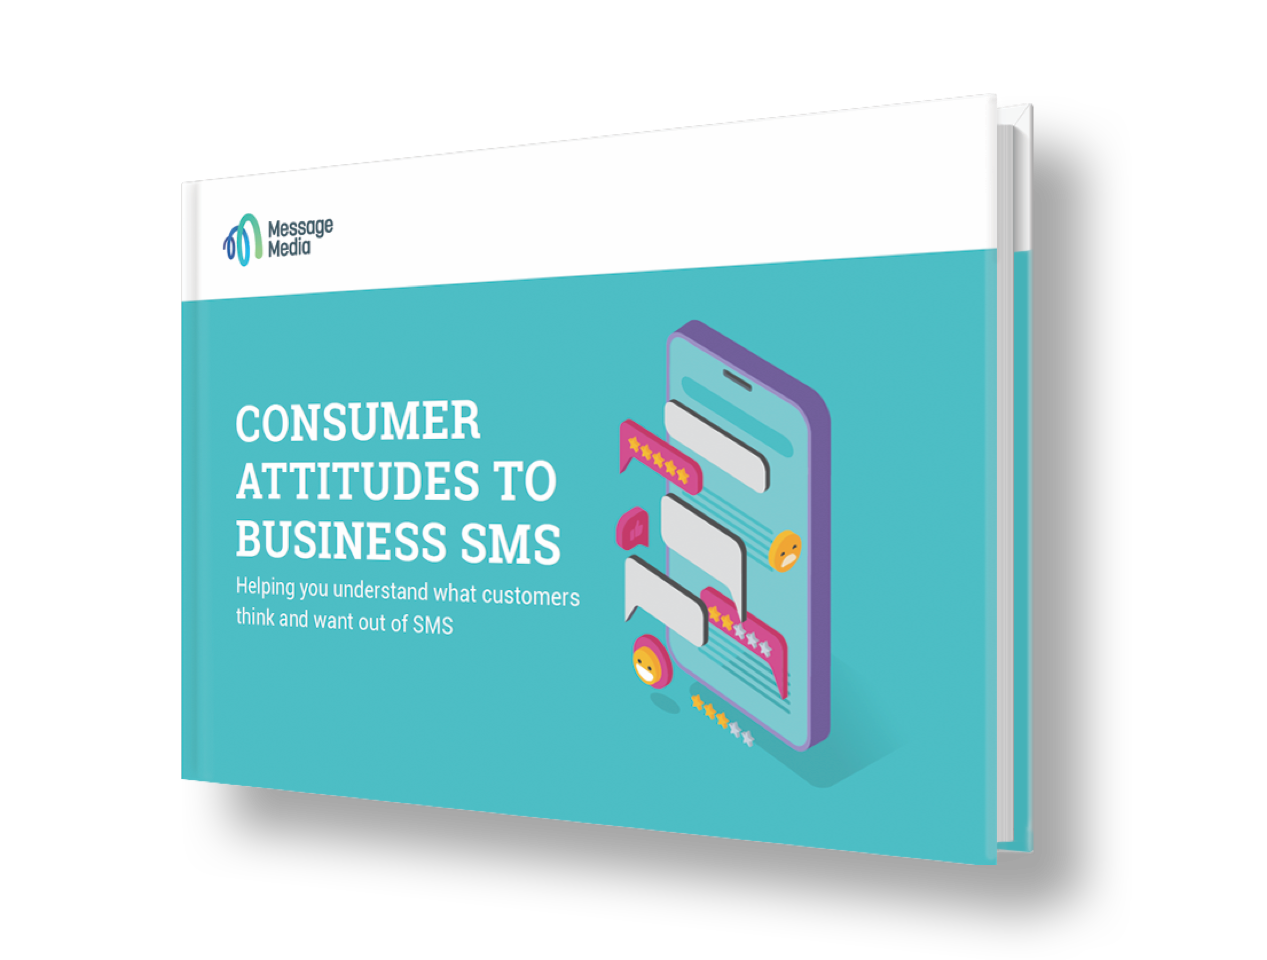 Image for Getting the message: Consumer attitudes to business SMS